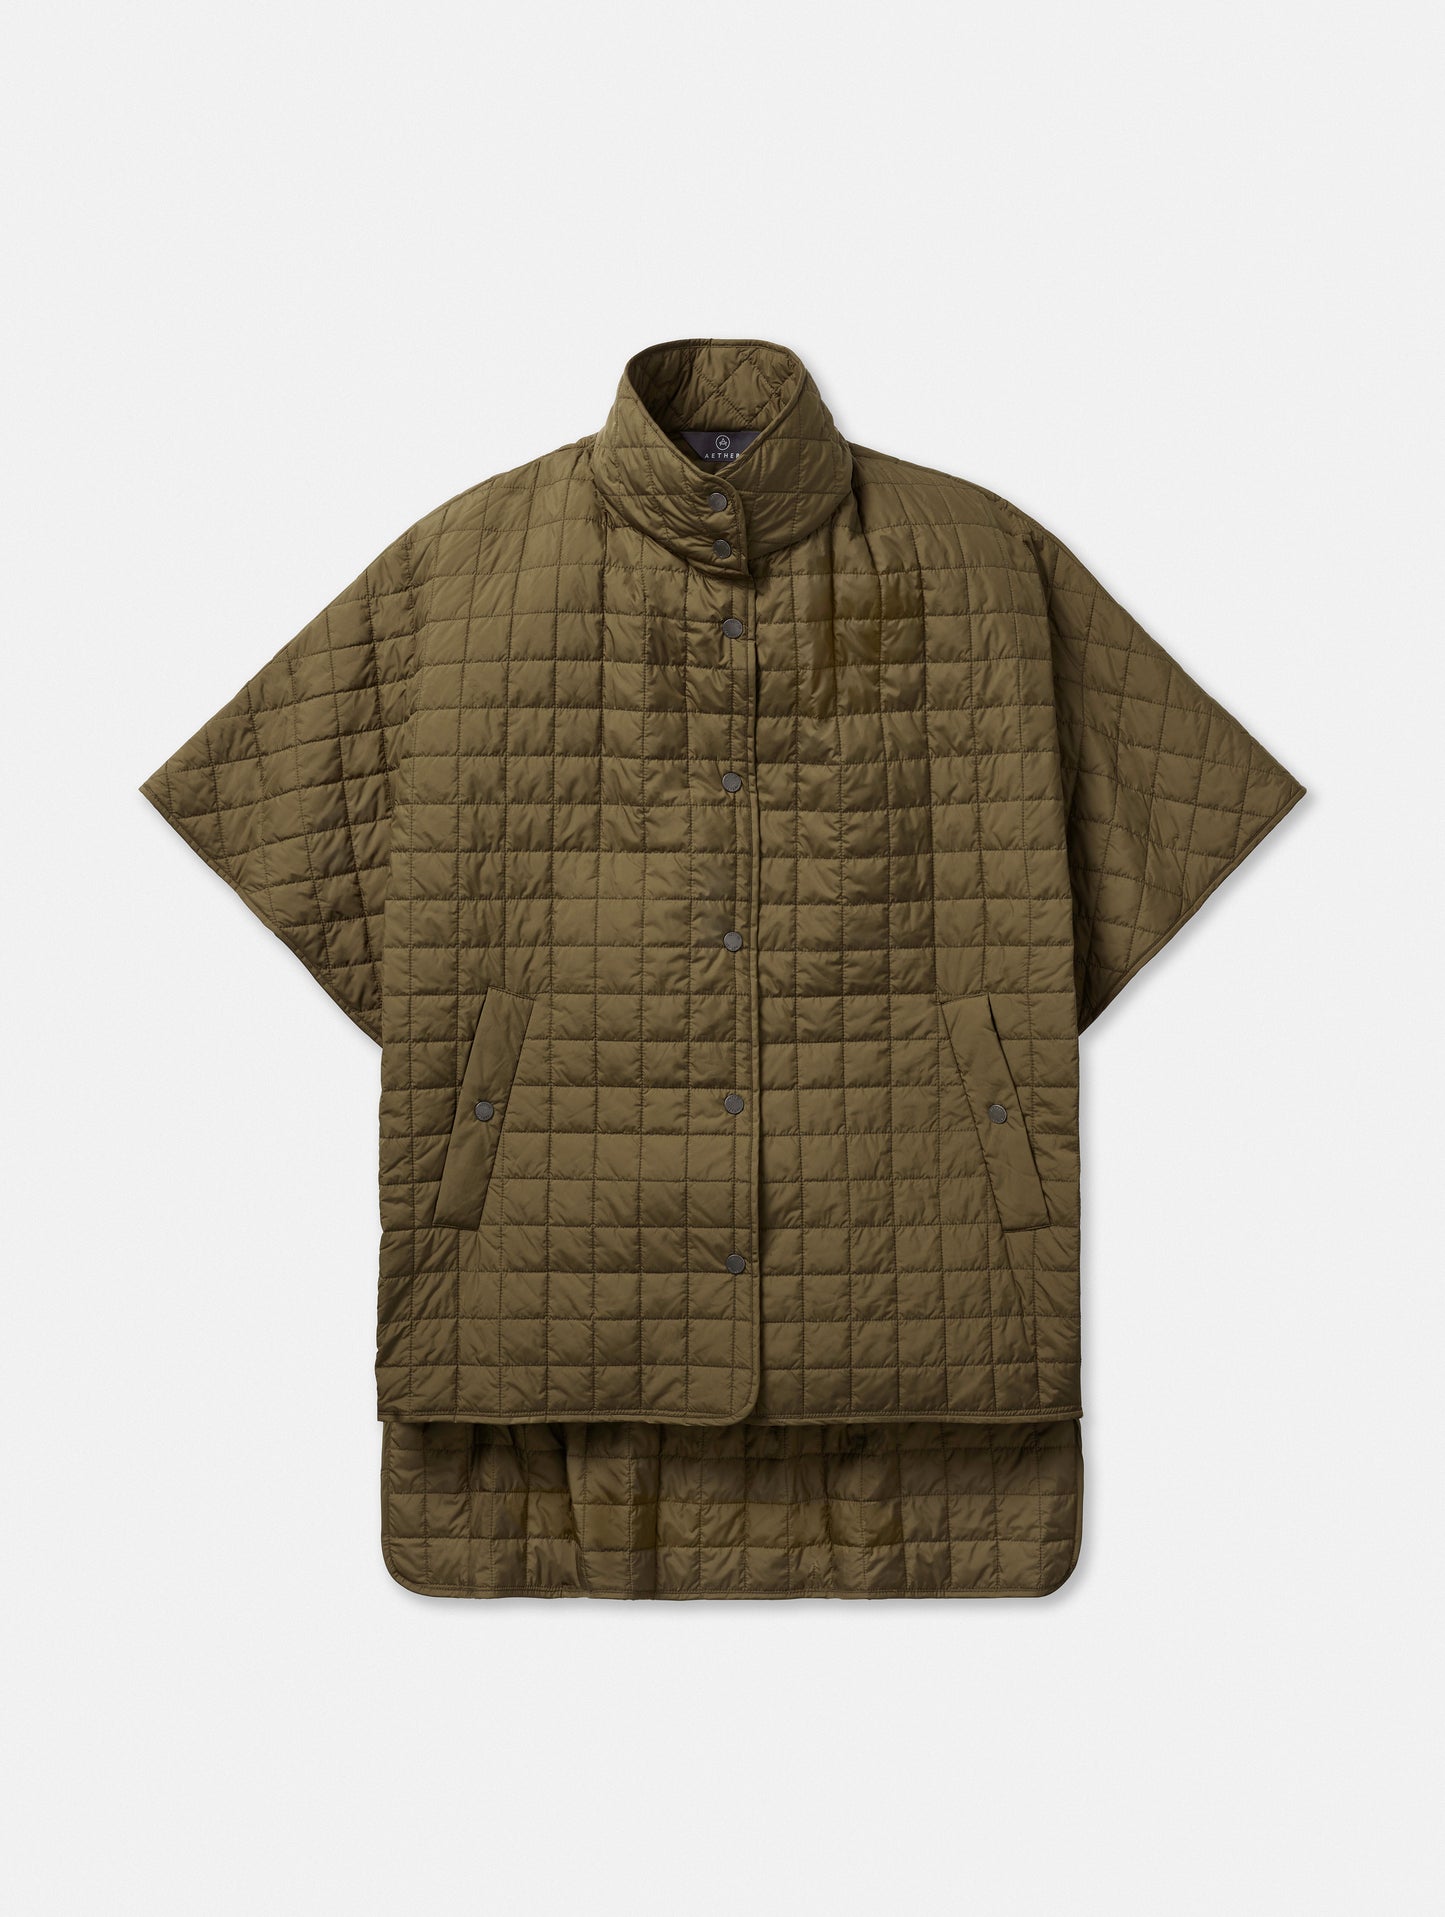 Green Bardo Poncho Jacket from AETHER Apparel